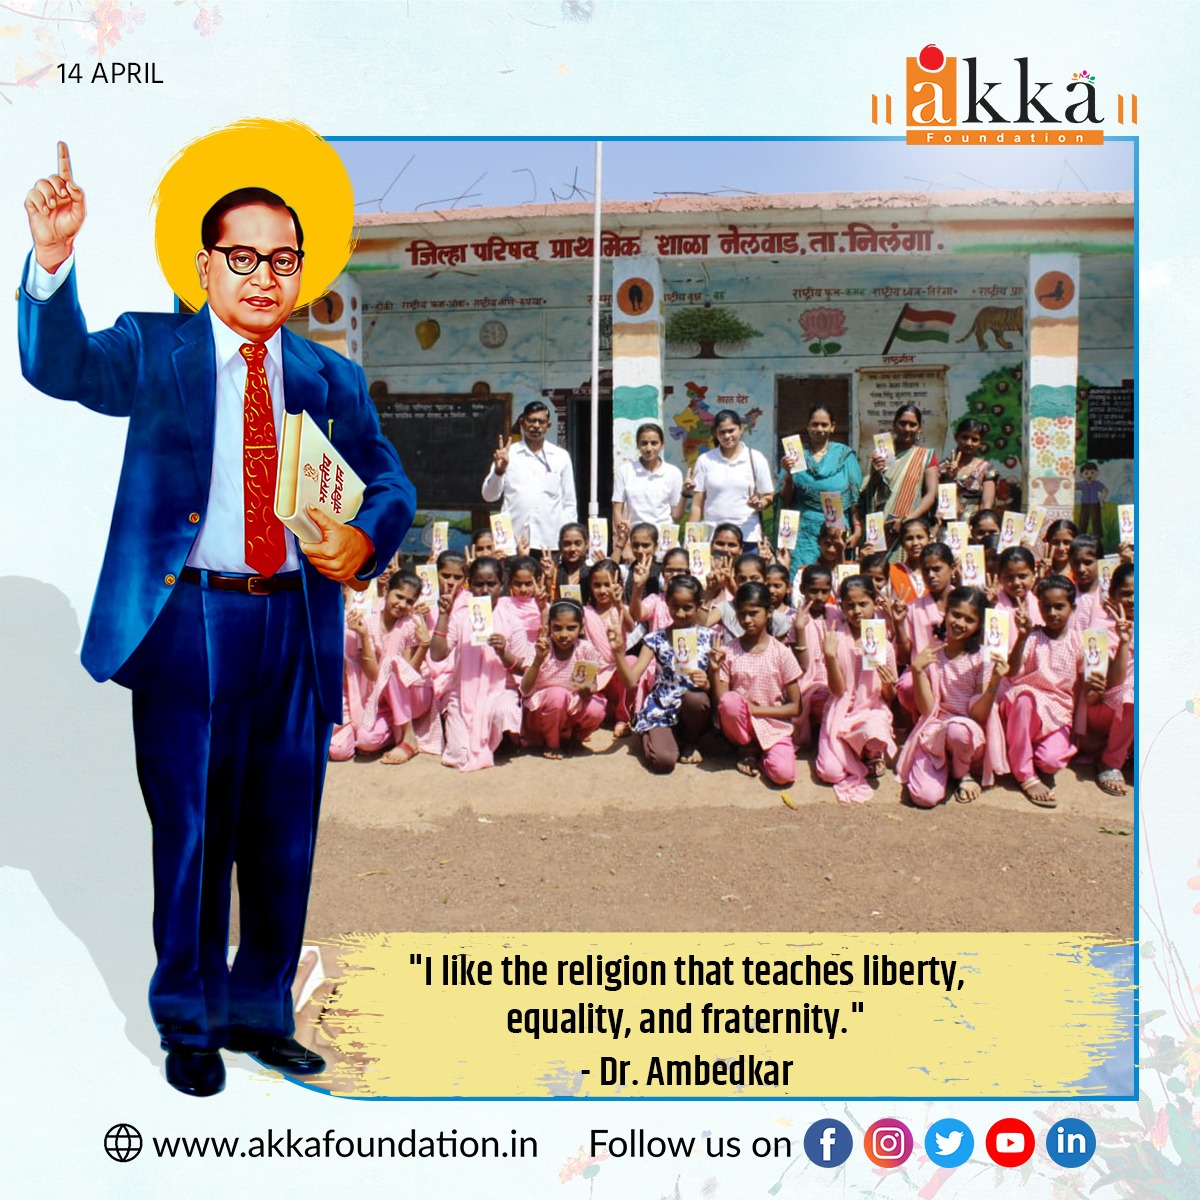 For a successful revolution, it is not enough that there is discontent. What is required is a profound and thorough conviction of the justice, necessity and importance of political and social rights.

#BRambedkar #Visionaryleader #Great_Economist
#projectanandi #AkkaFoundation